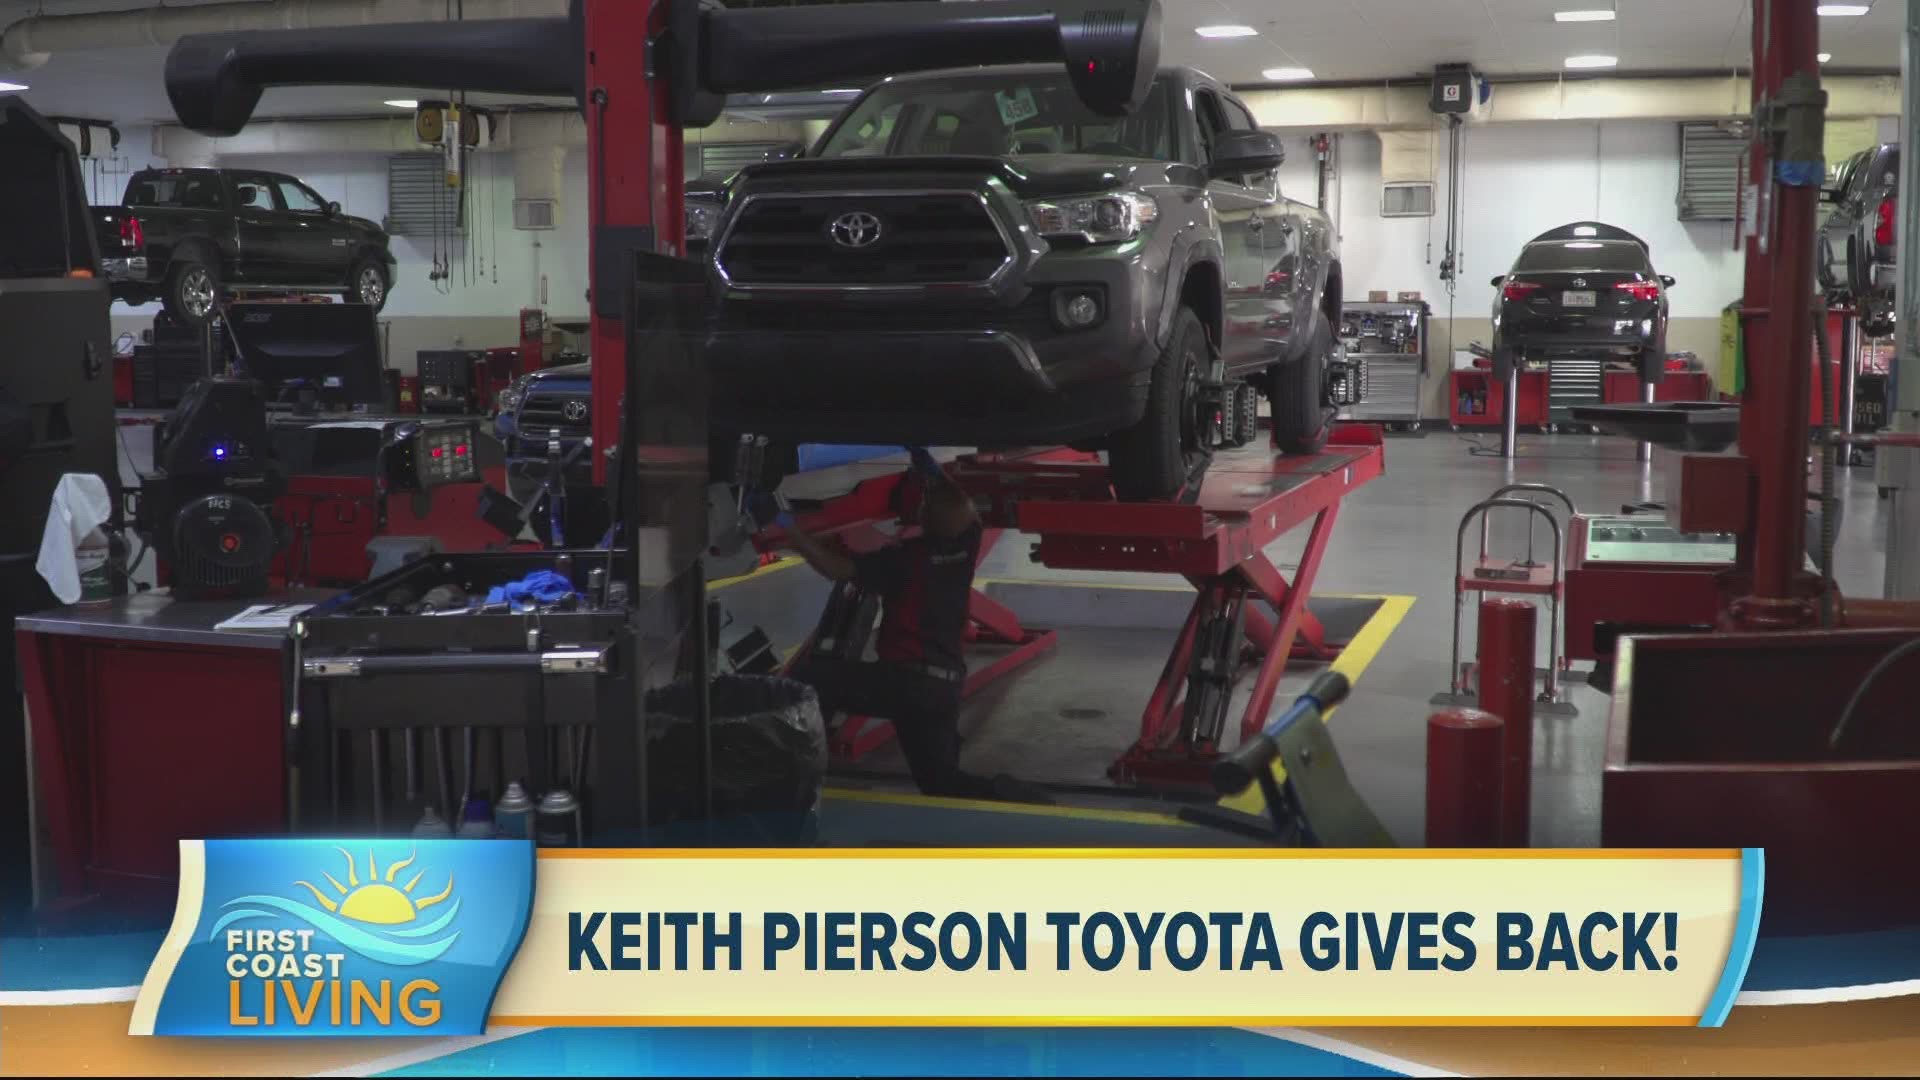 Keith Pierson Toyota is disinfecting your vehicle as well as offering special deals to first responders!